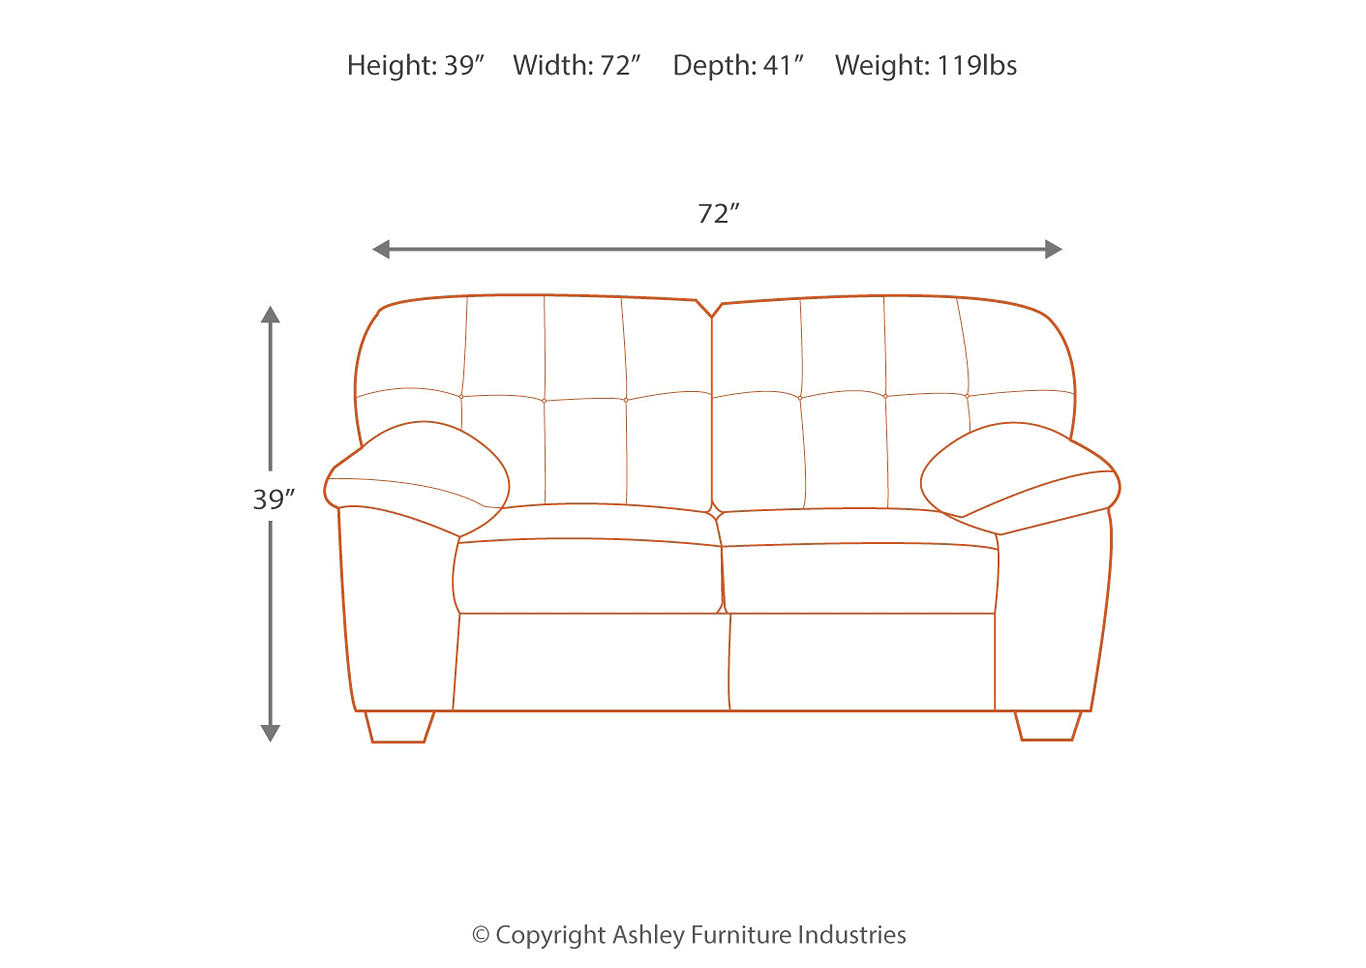 WEEKLY or MONTHLY. Arching Earth Sofa and Loveseat